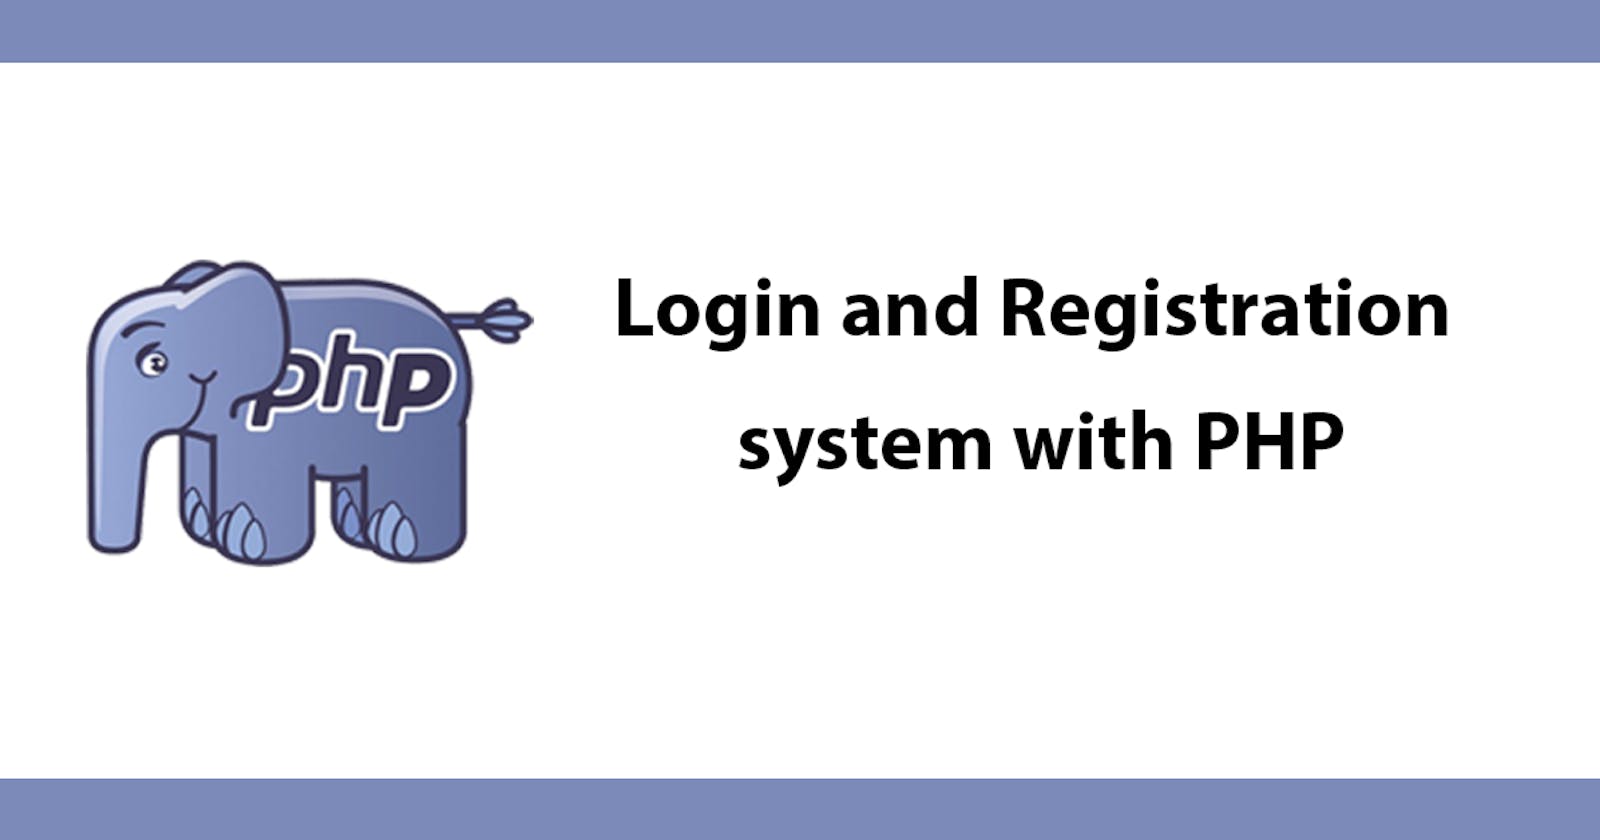 Login and Registration system with PHP